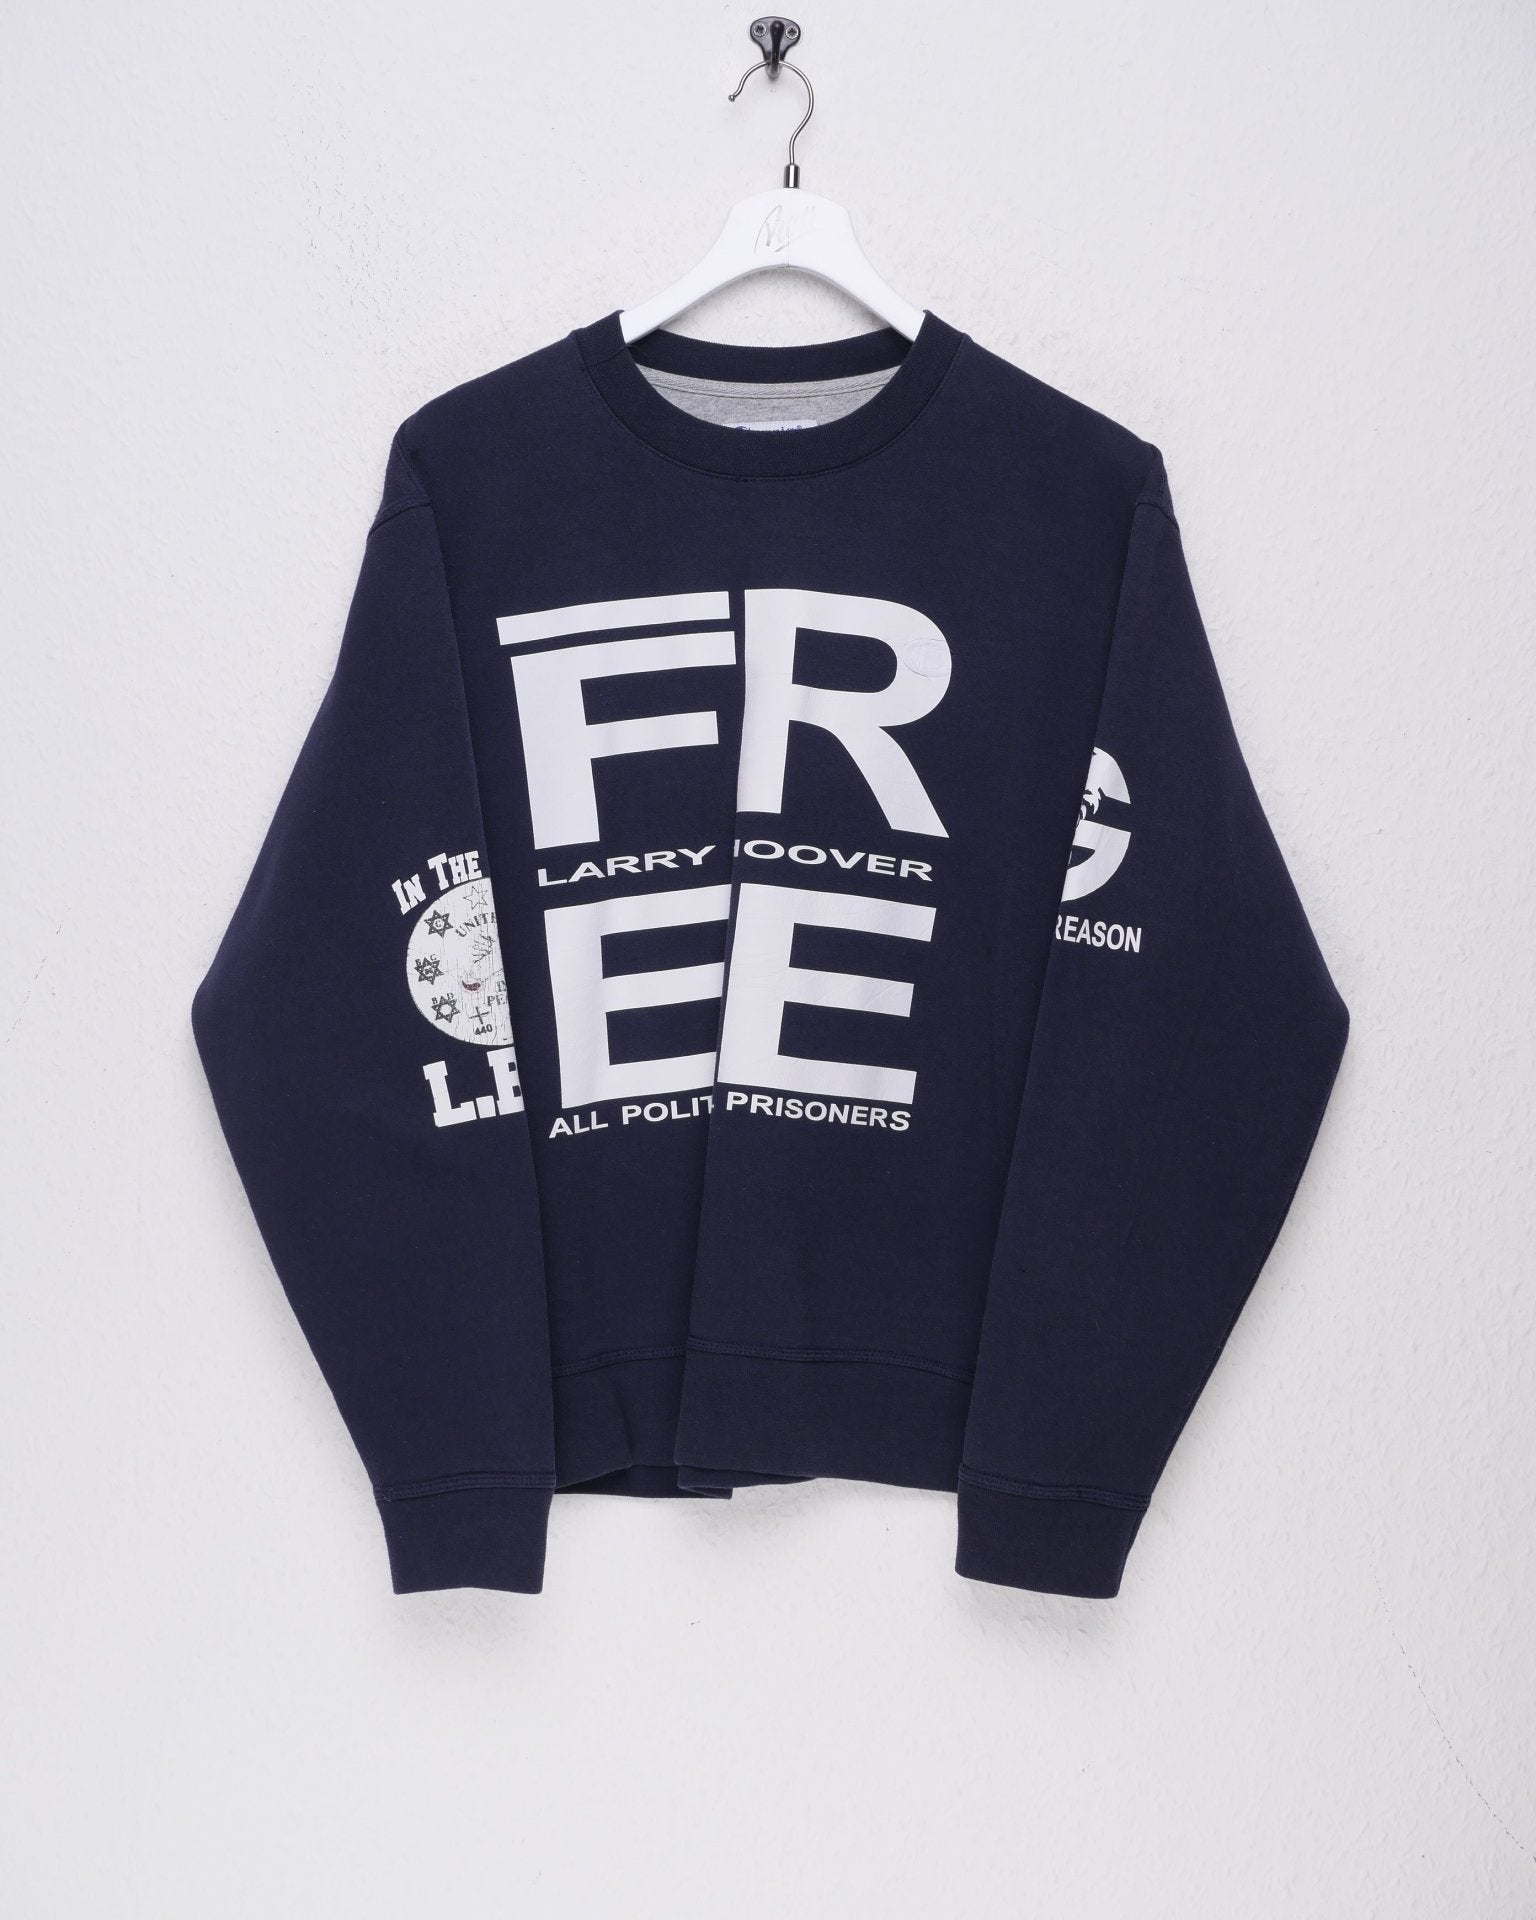 Champion 'Free Larry Hoover' printed Graphic navy Sweater - Peeces